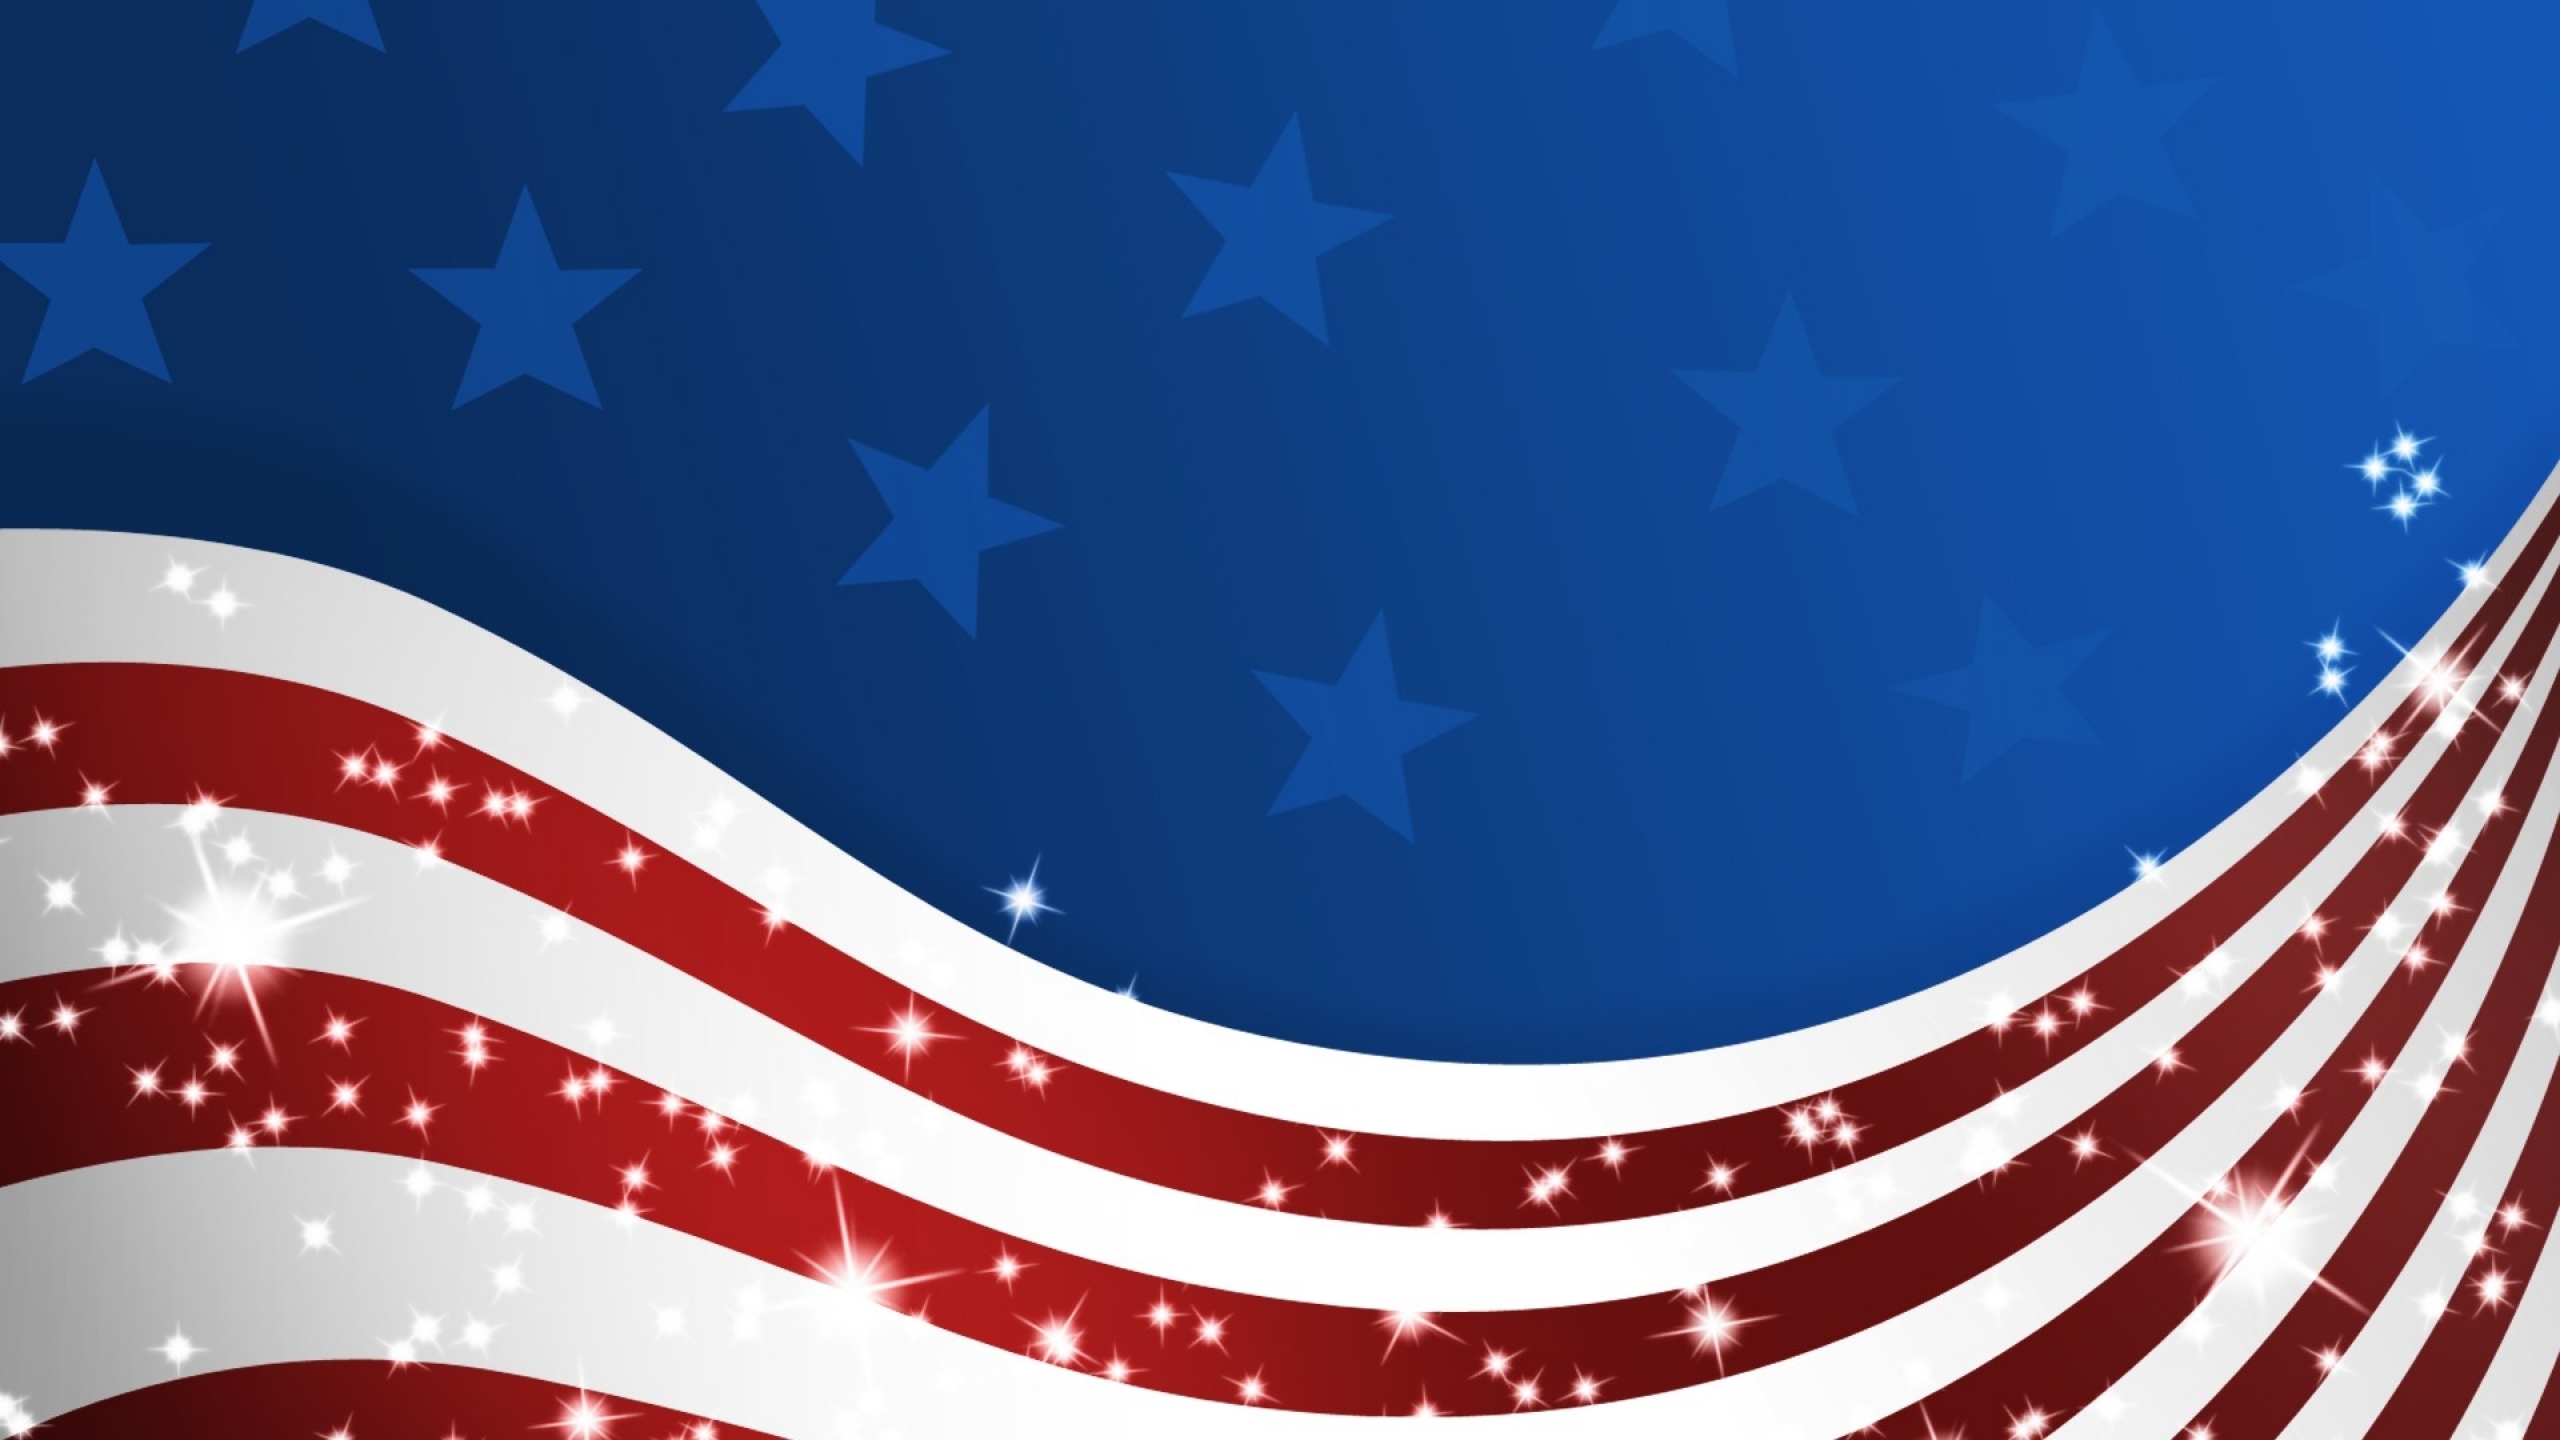  stars and stripes 1920x1080 wallpaper Wallpaper Free Wallpapers